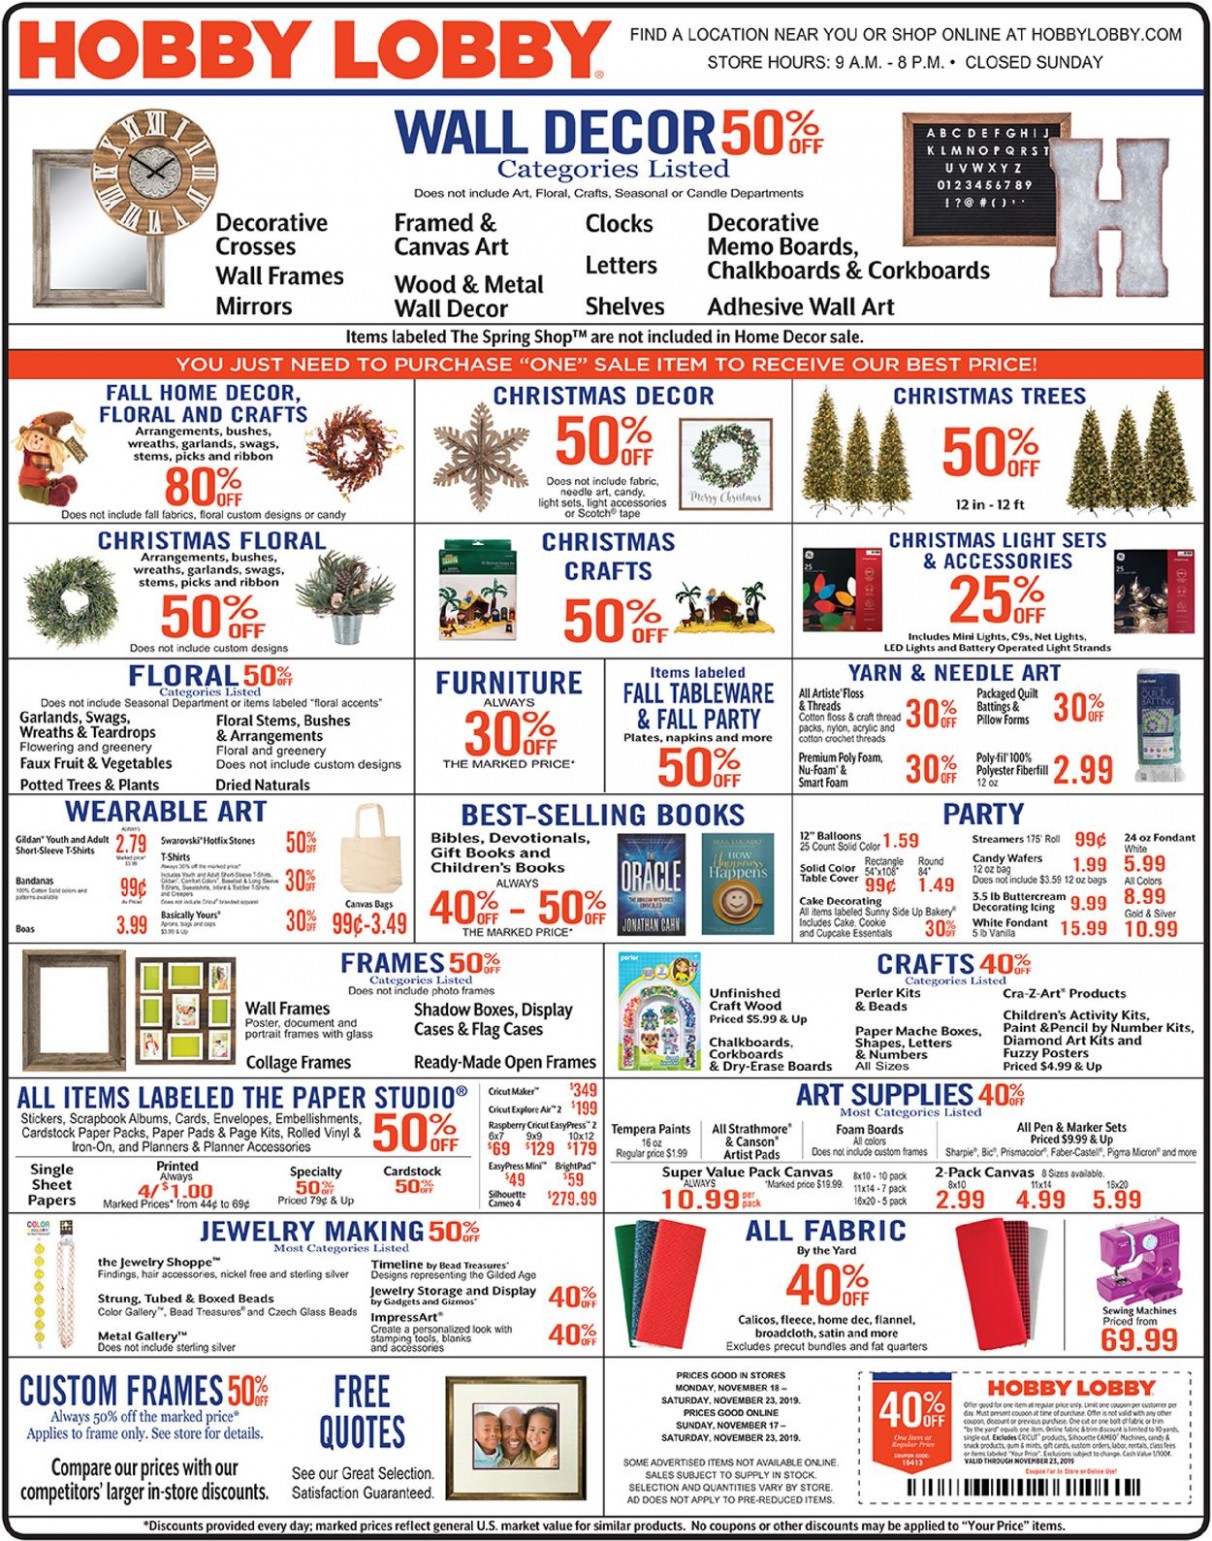 Hobby Lobby Current Weekly Ad 6/6 6/6/6 Frequent Ads